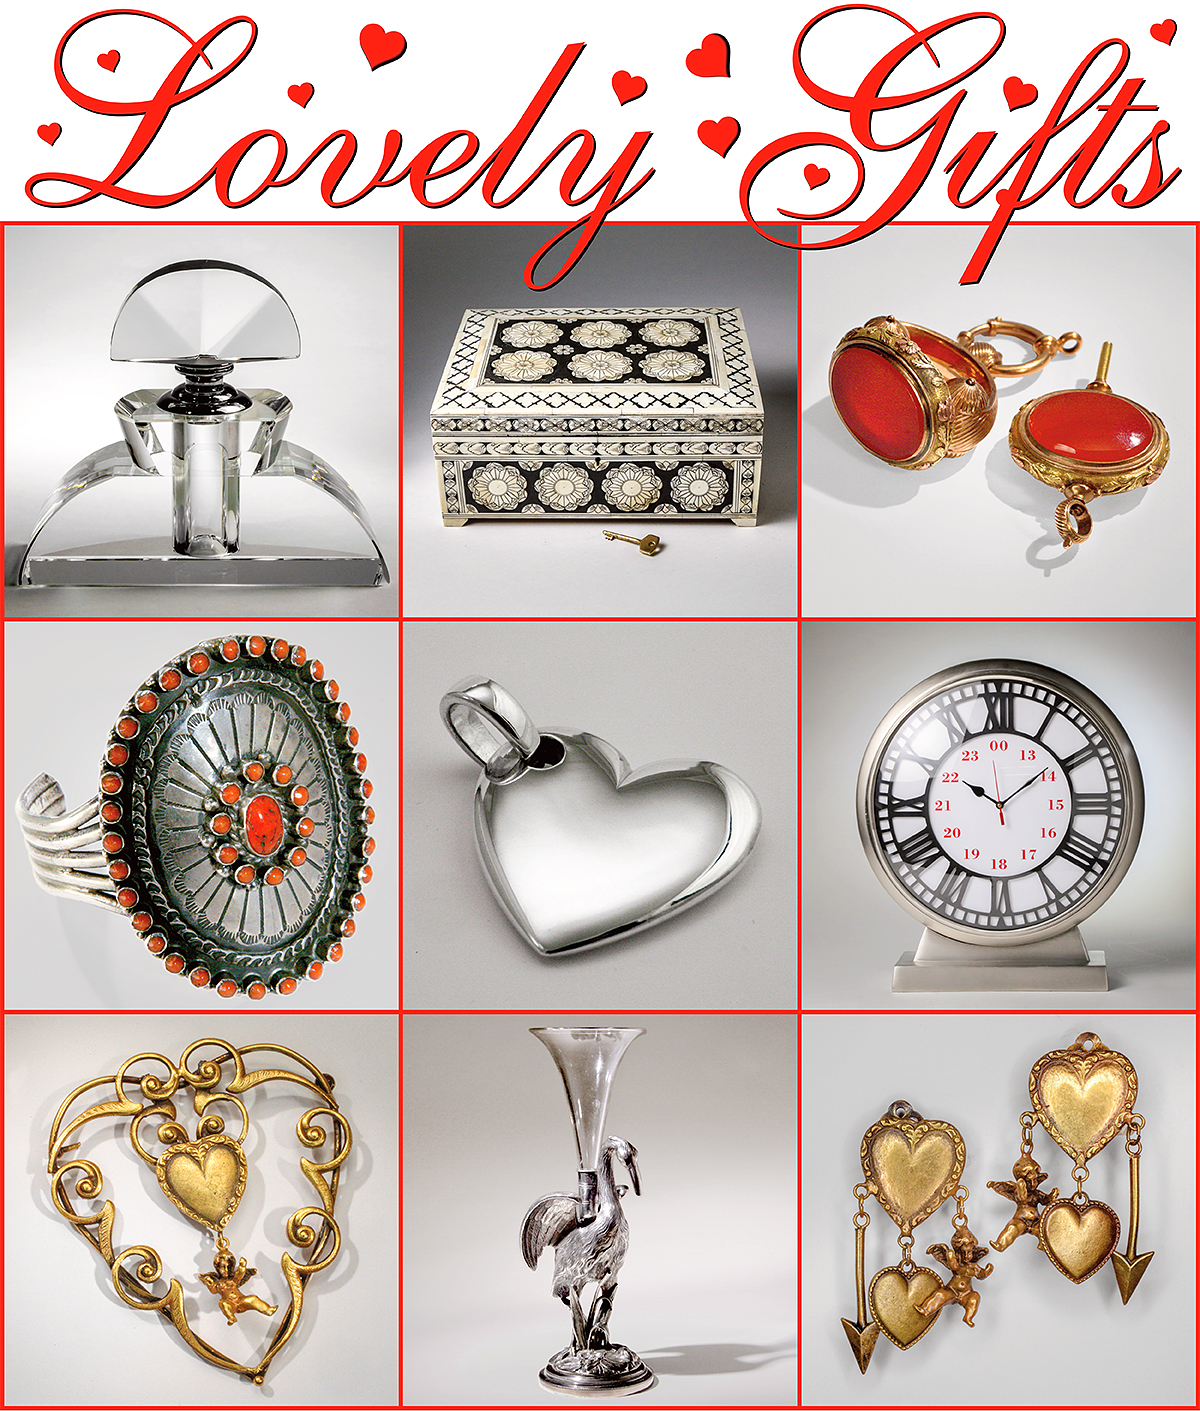 Lovely Gifts for Valentine's Day